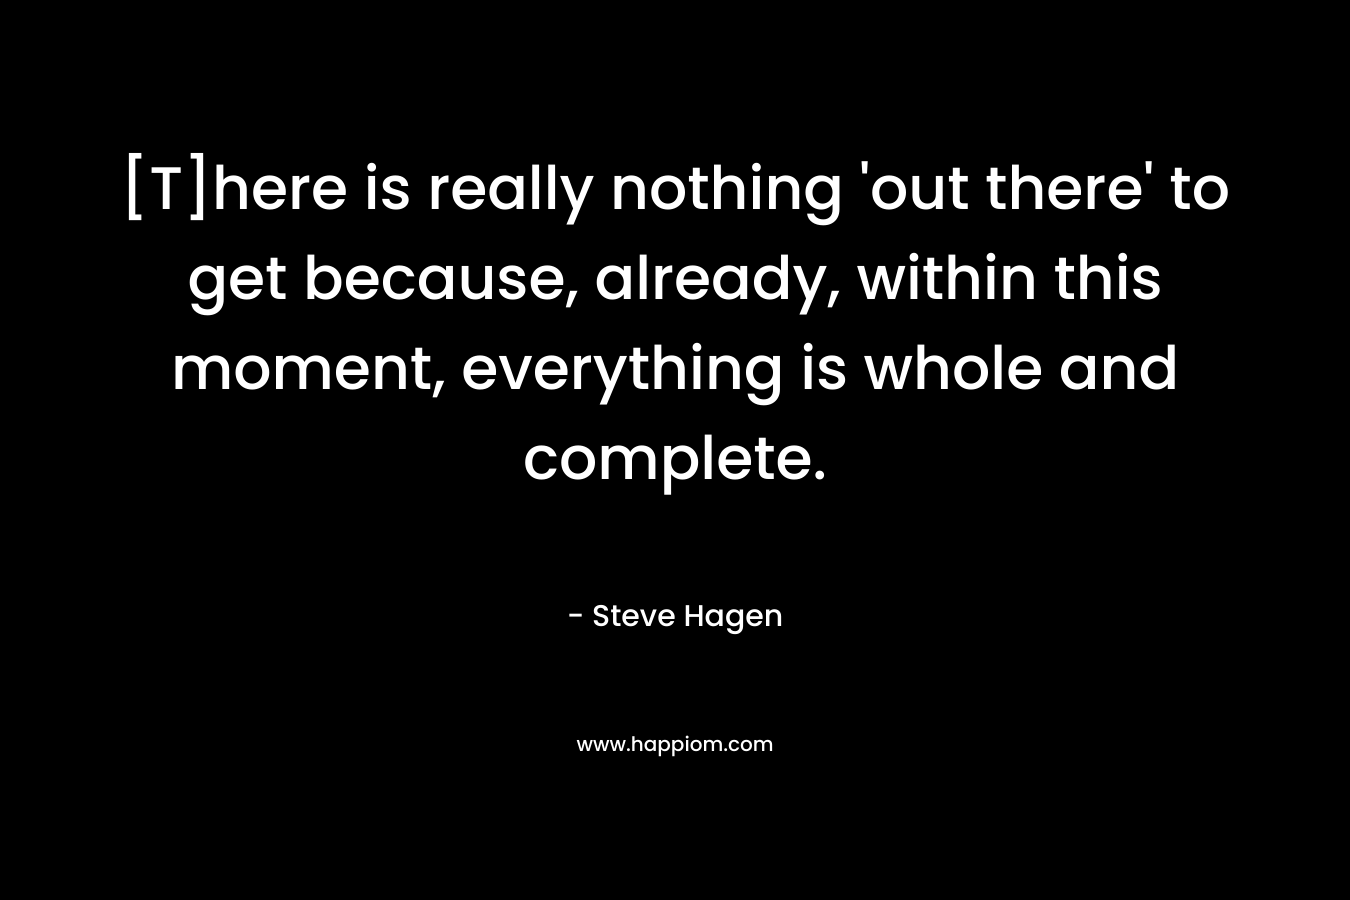 [T]here is really nothing 'out there' to get because, already, within this moment, everything is whole and complete.